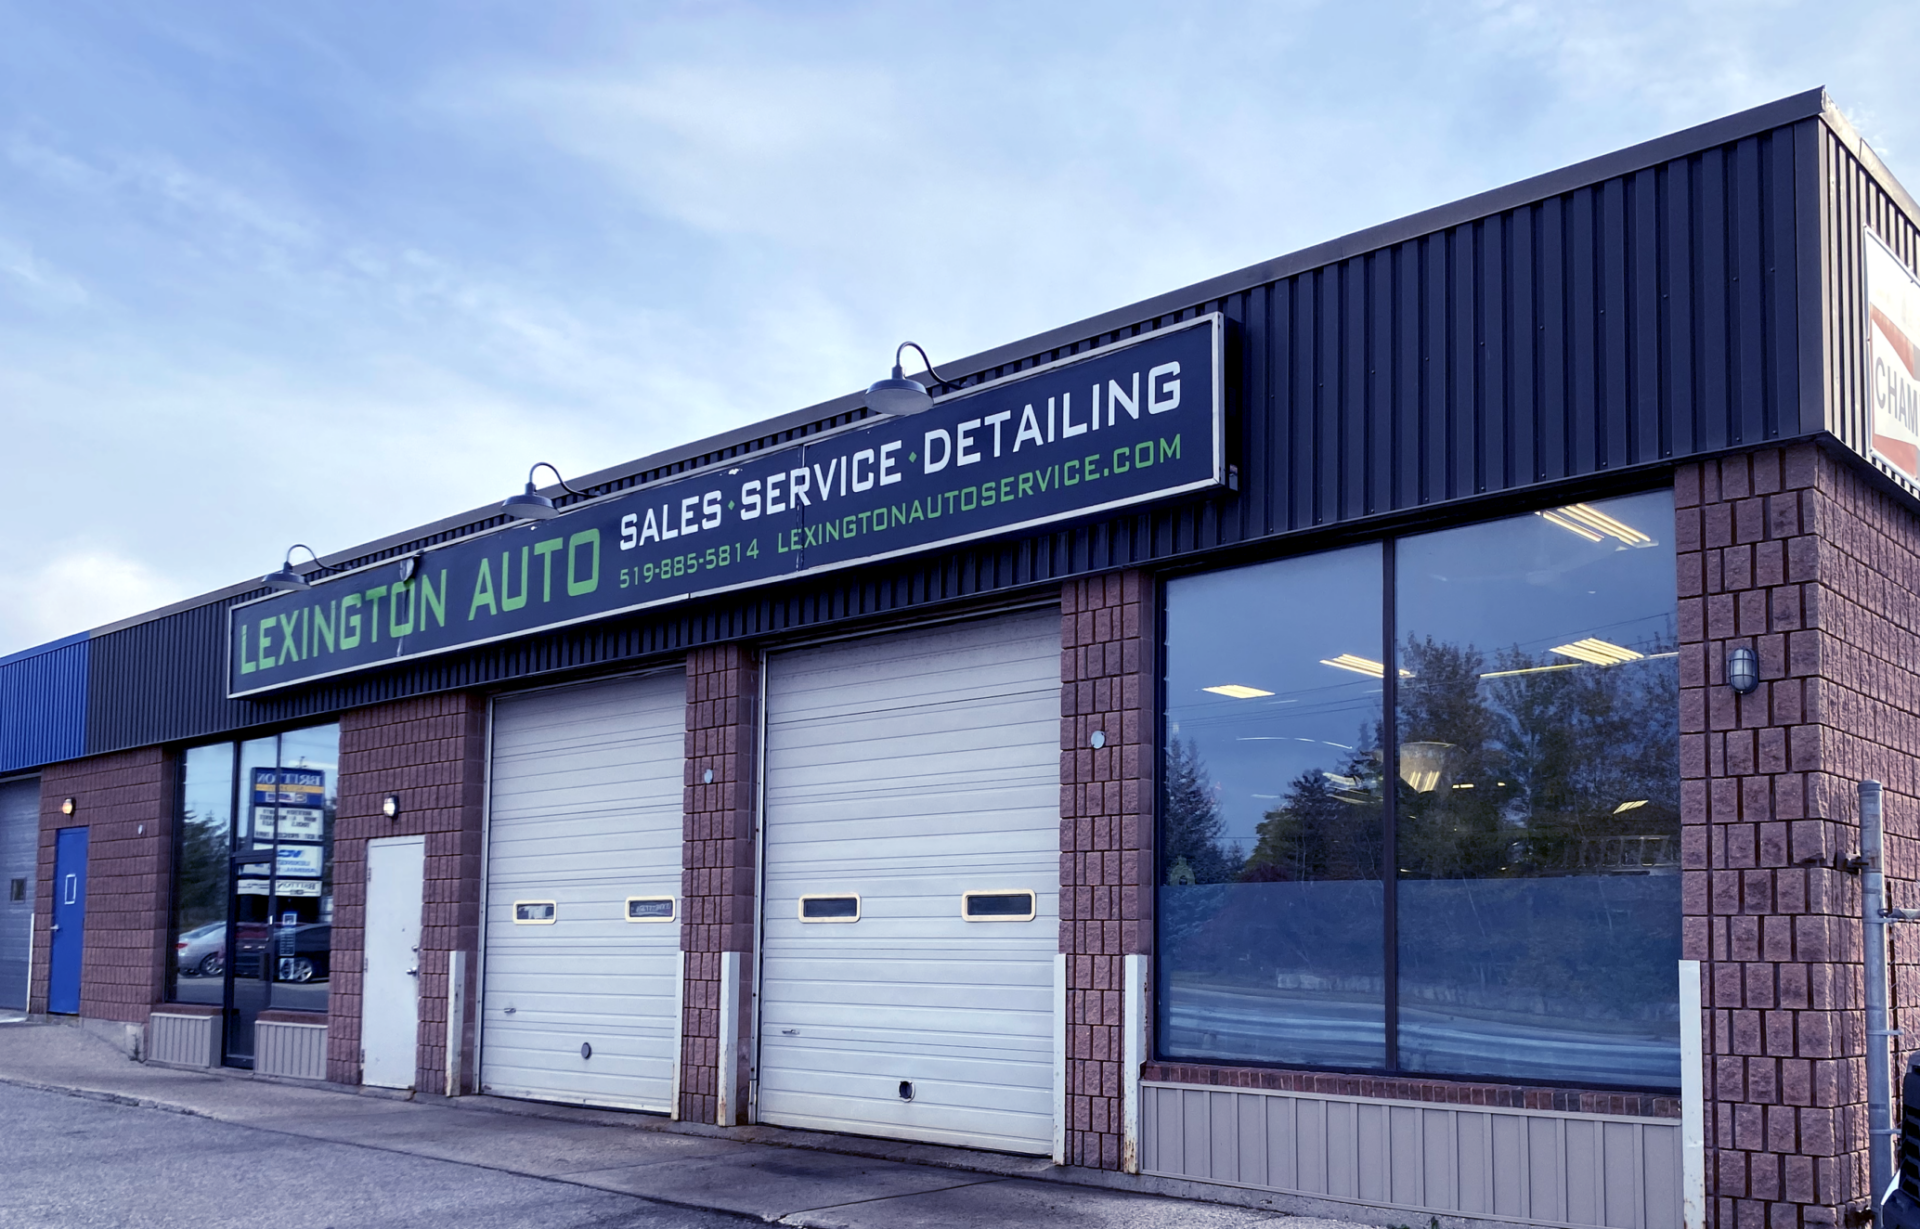 This image shows the exterior of Lexington Auto, an automotive business offering sales, service, and detailing, with a blue and brick facade and garage doors.